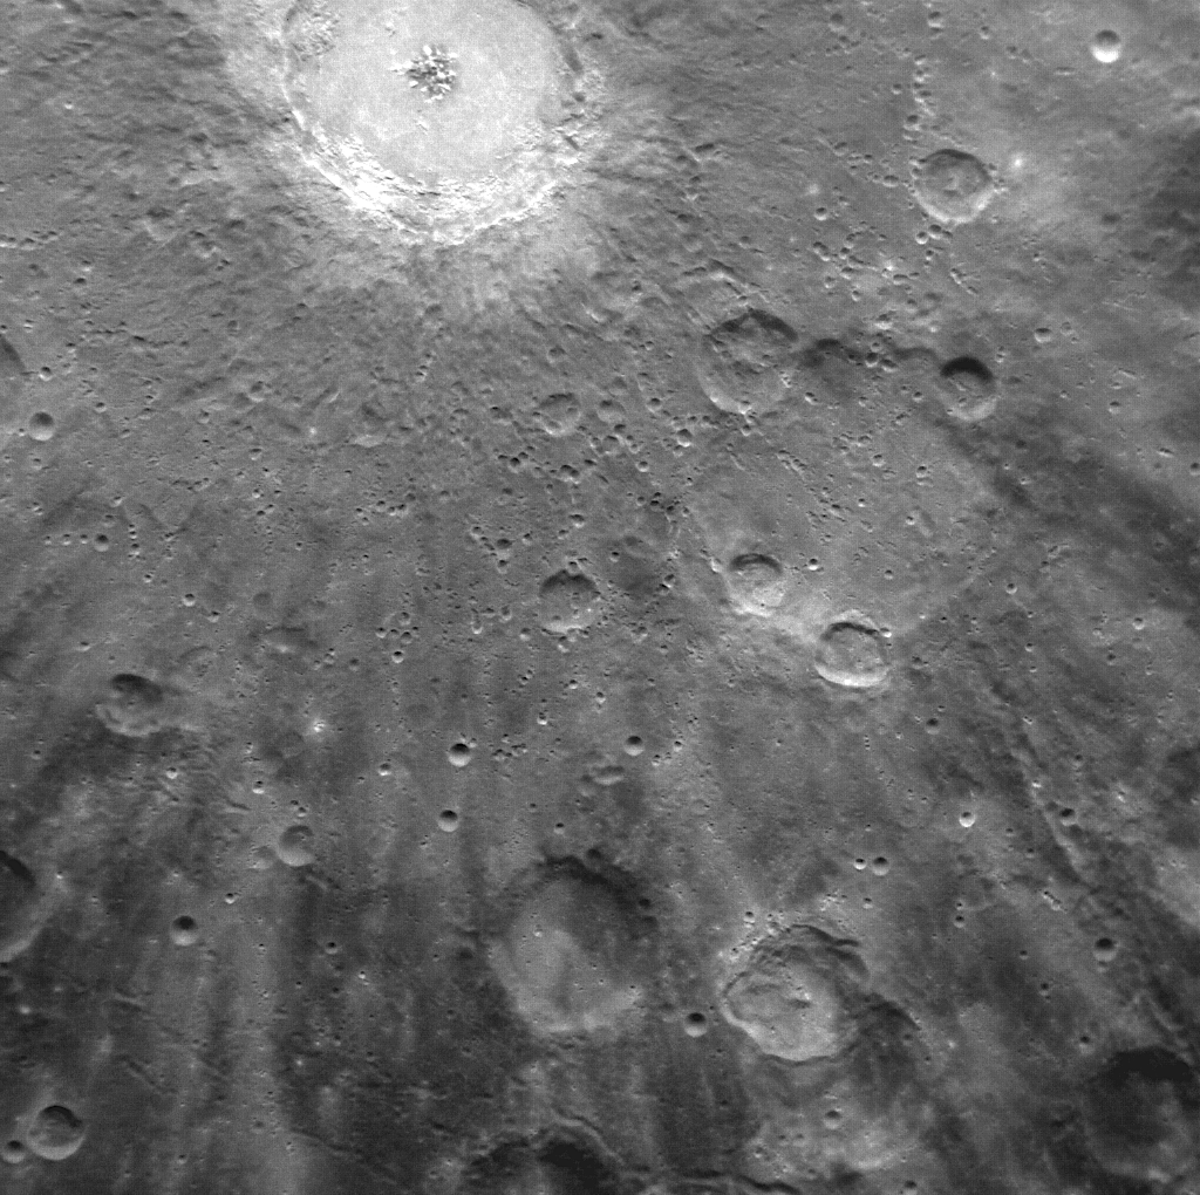 Moon-like craters never seen before on Earth ‘are evidence of massive ancient impact’